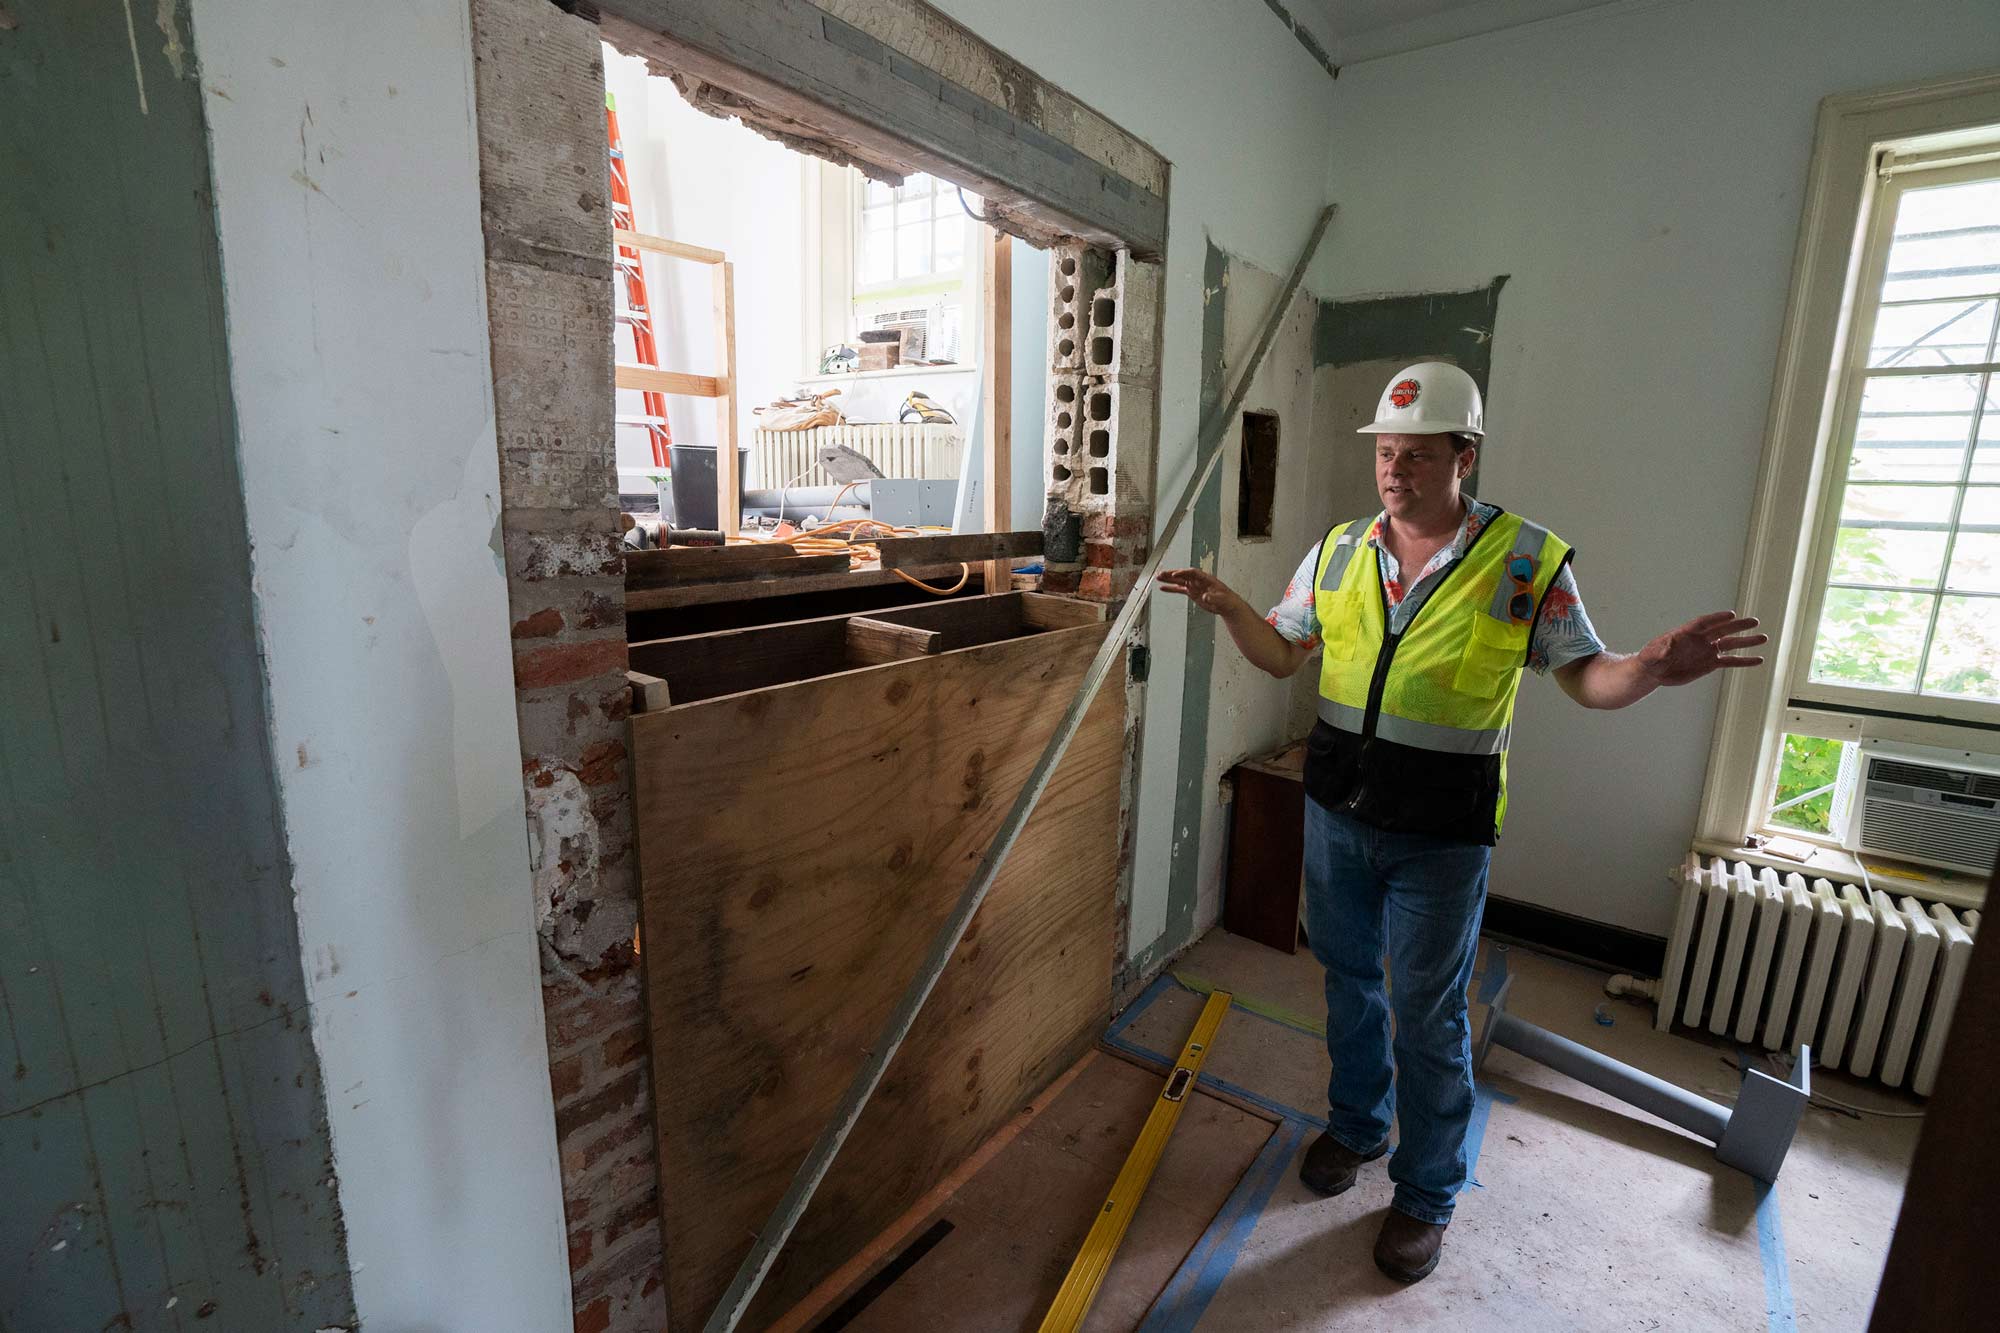 James Zehmer stands in the lower Lawn Room 48, wearing a high visibility vest and hard hat, next to a hole in the wall revealing Room 50.